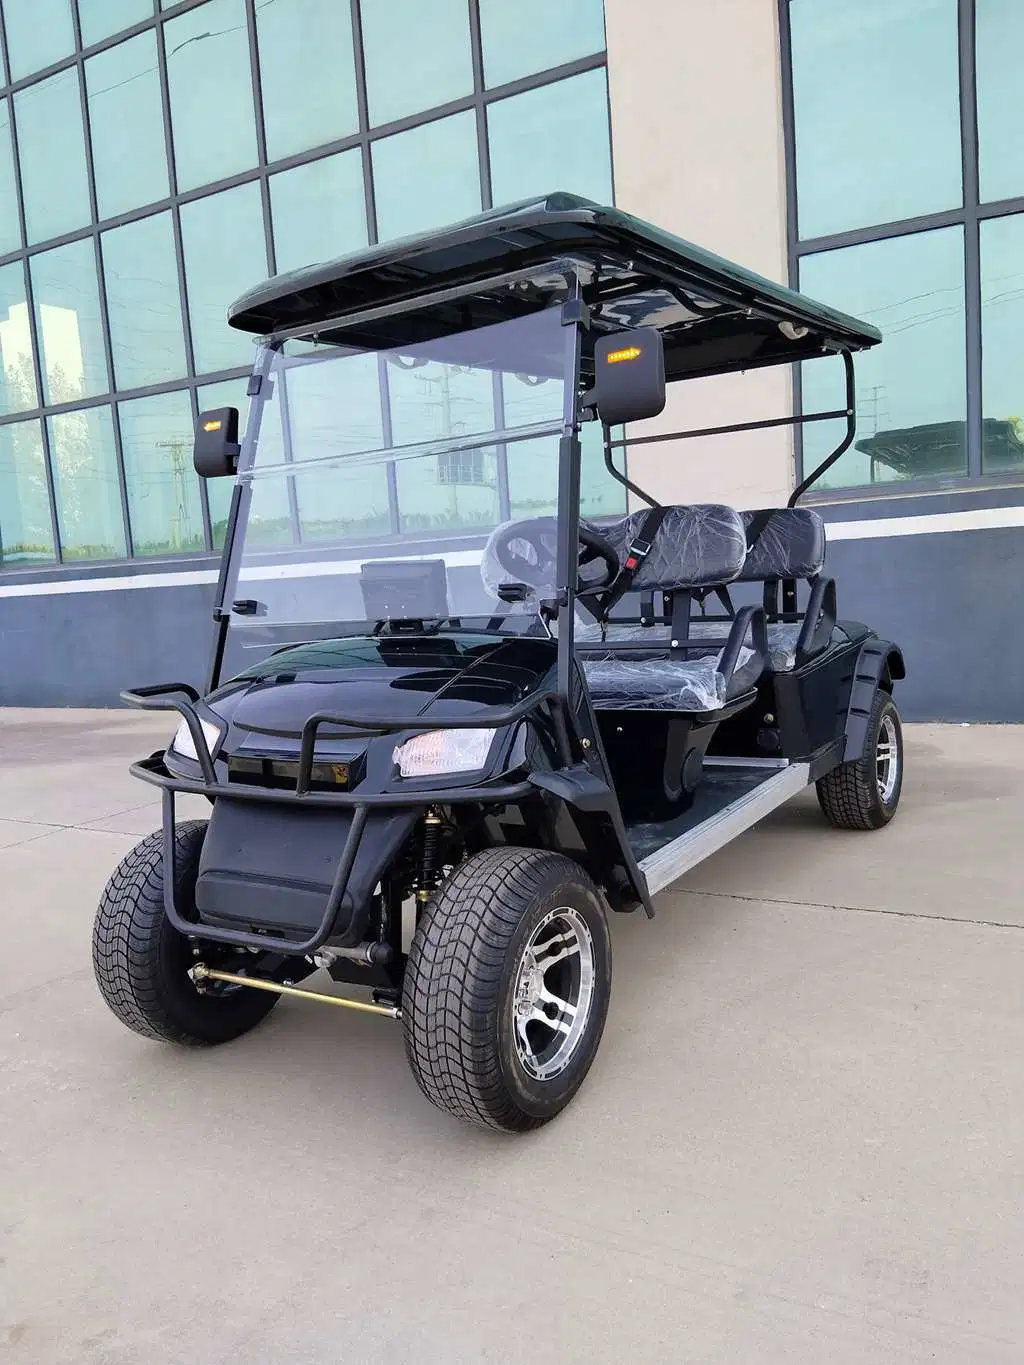 Mini High Chassis Golf Carts 4seat Manufacture with Storage Space at Back Cheap Price High Quality Golf Cart for Sale